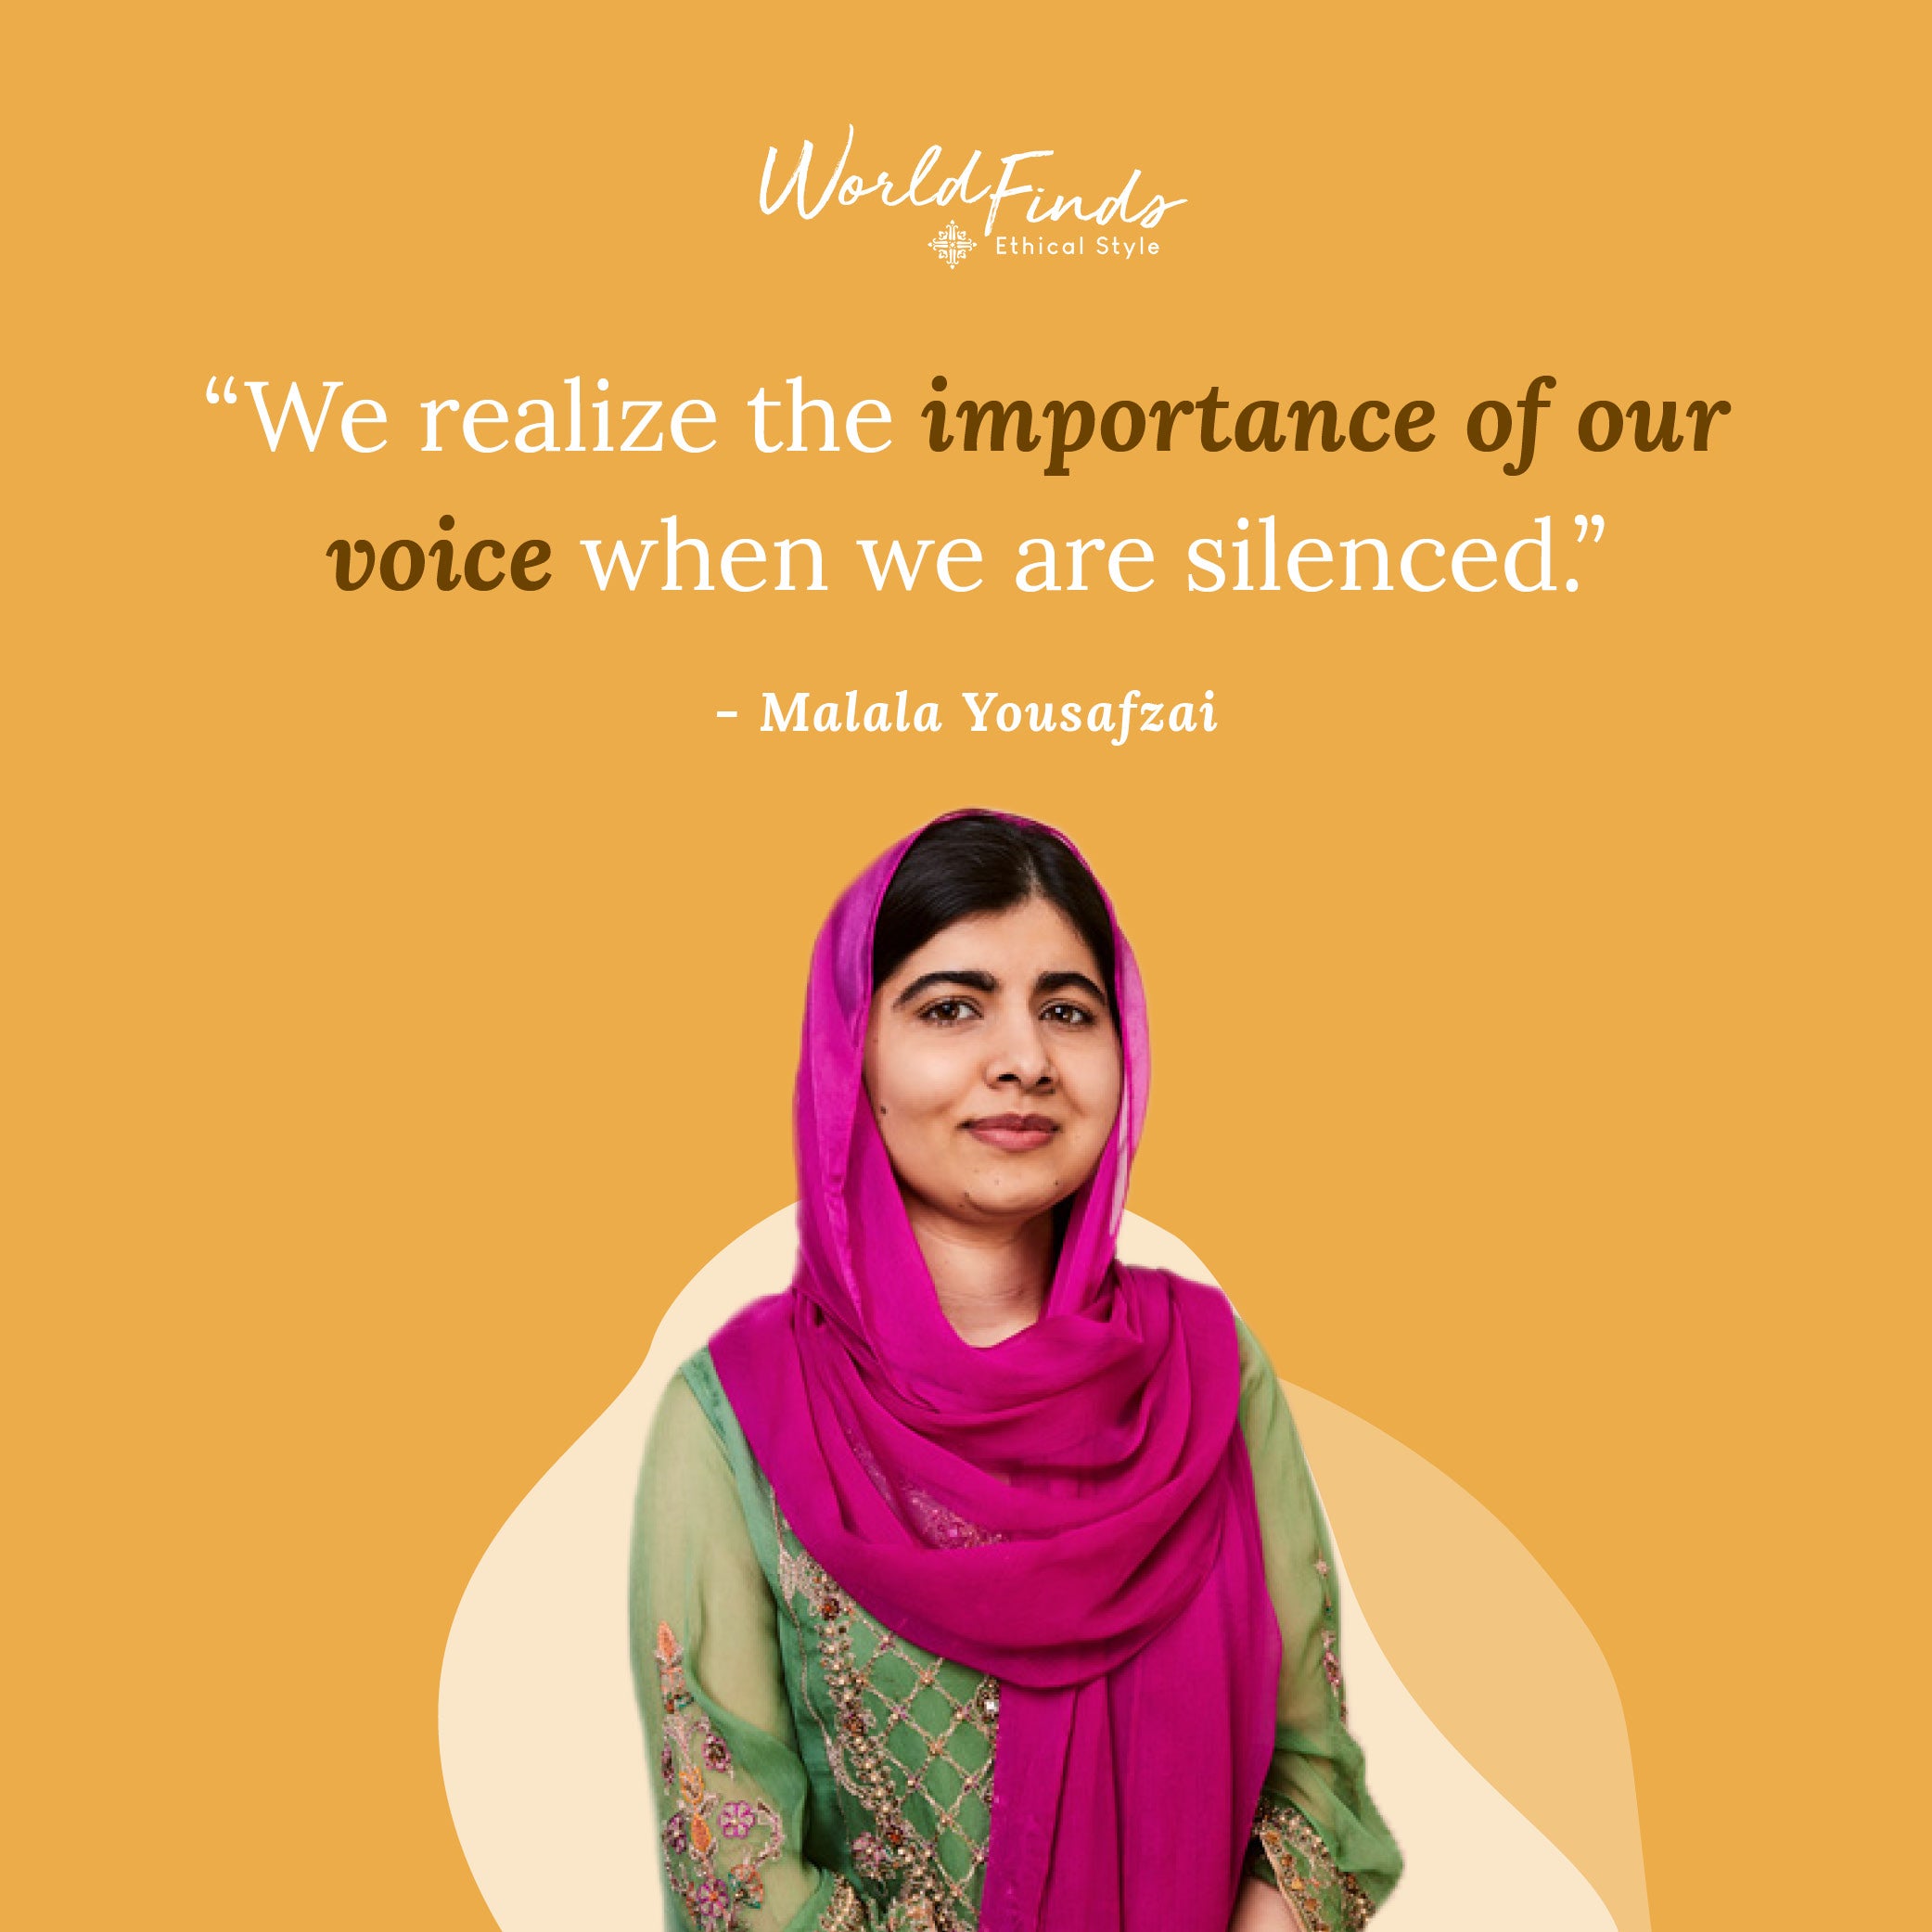 Quote from Malala Yousafzai, "We realize the importance of our voice when we are silenced"